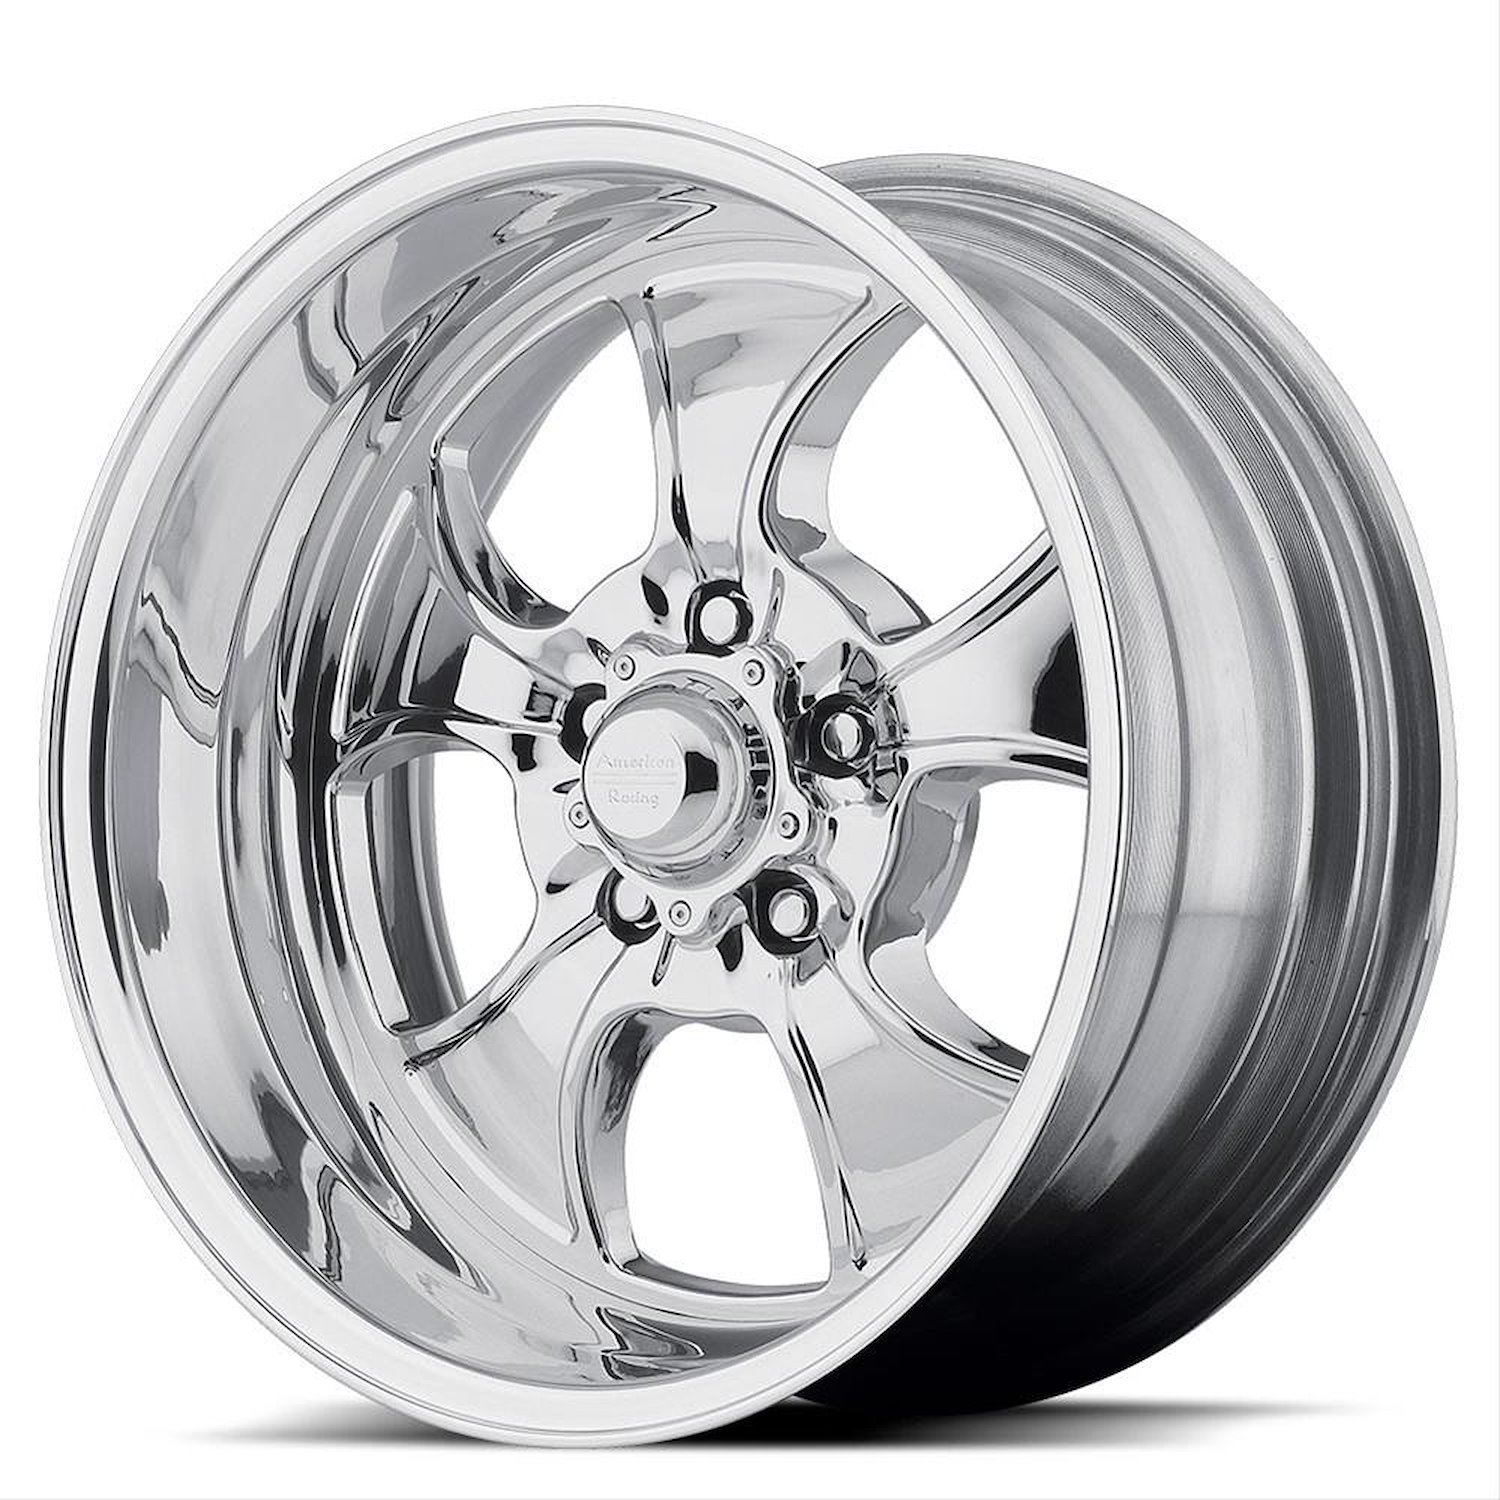 AMERICAN RACING HOPSTER TWO-PIECE POLISHED 17 x 9.5 5x4.5 19 6.00